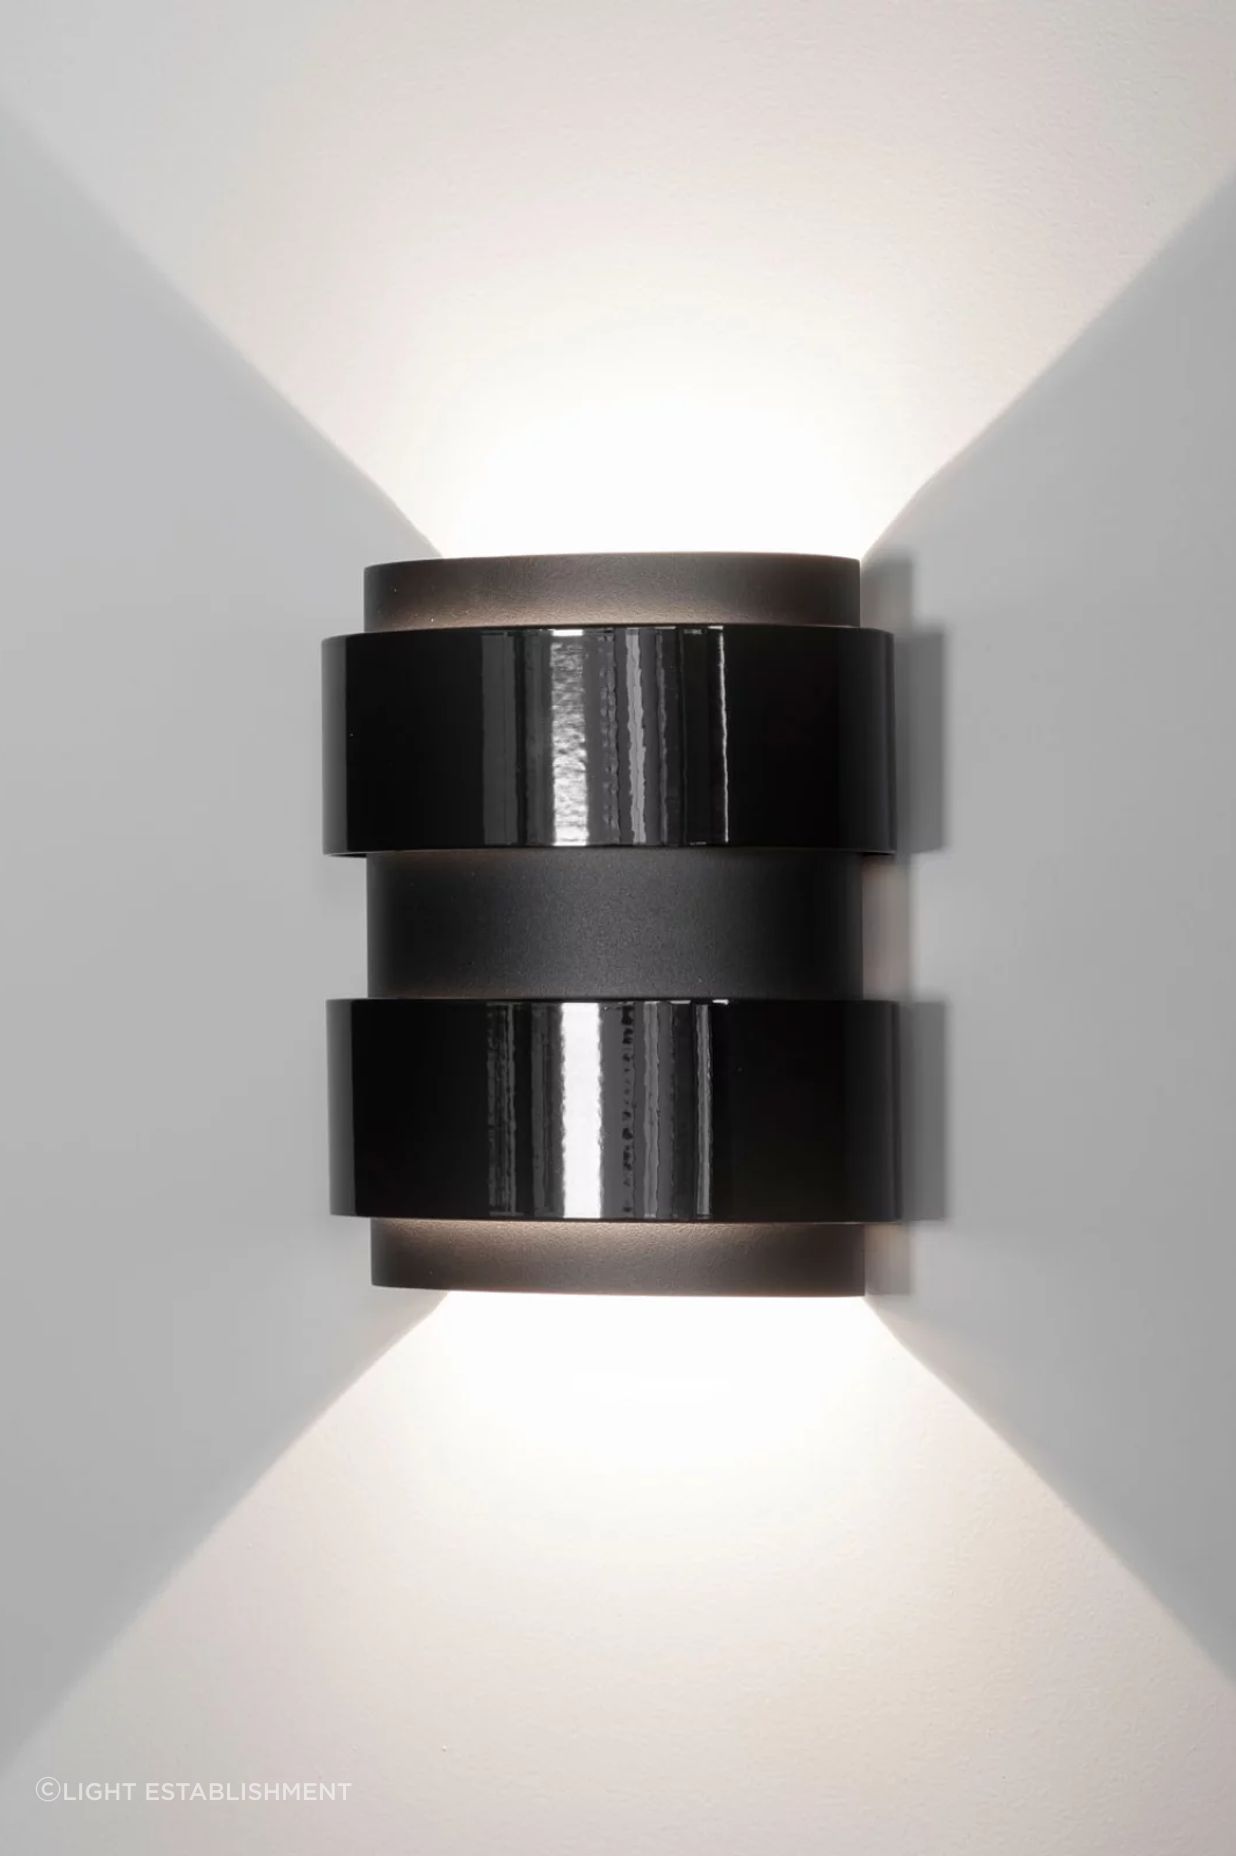 Band-Oh! by Delta Light is double finished in two shades of black, with an inner shell of brushed old bronze.